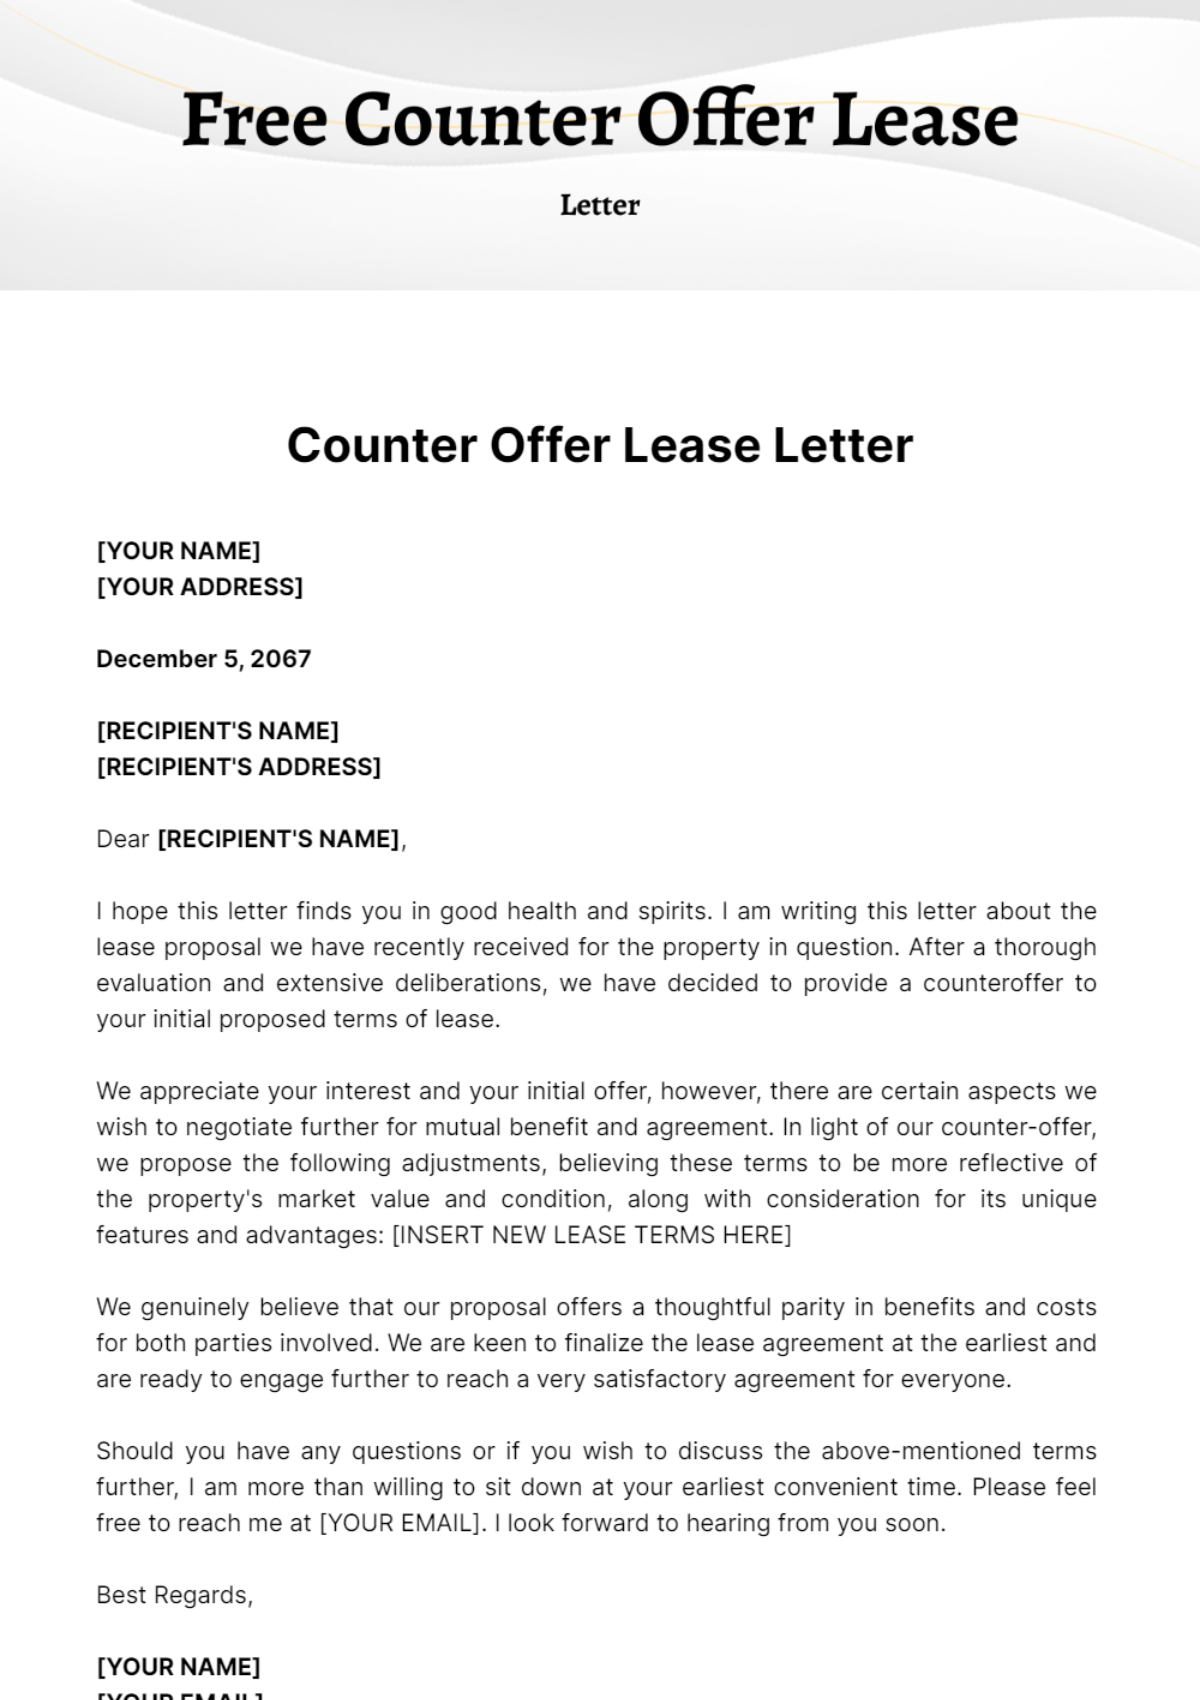 Free Counter Offer Lease Letter Template